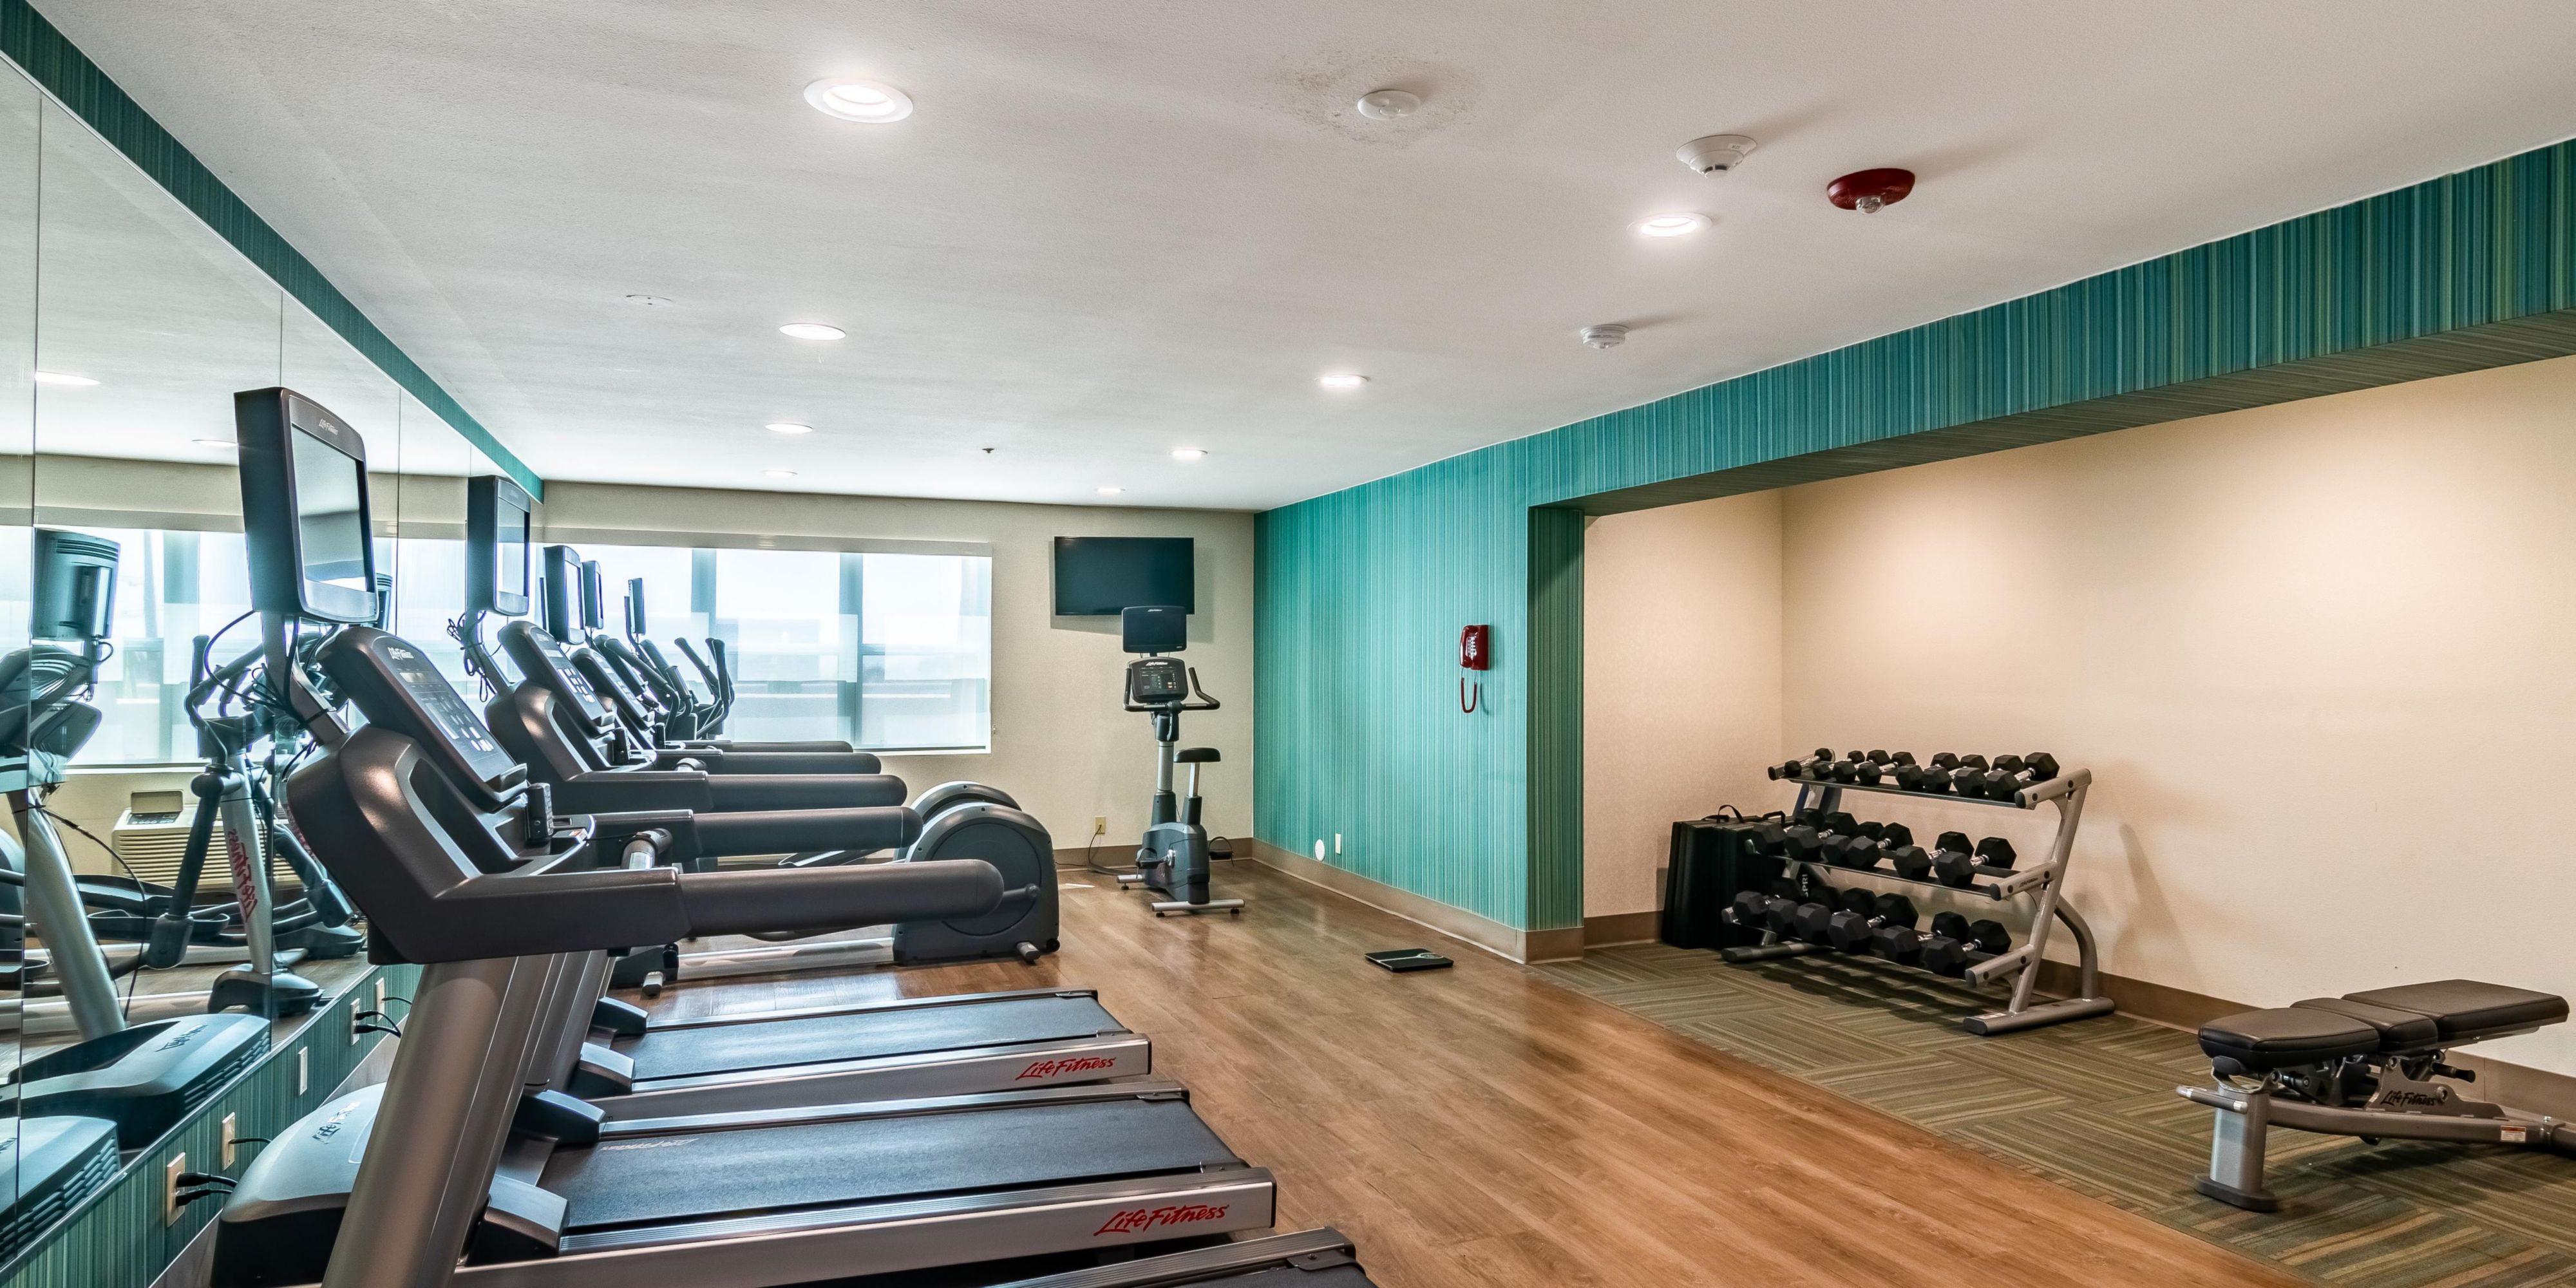 Use our complimentary fitness center to stay fit and healthy even when you're on the road!